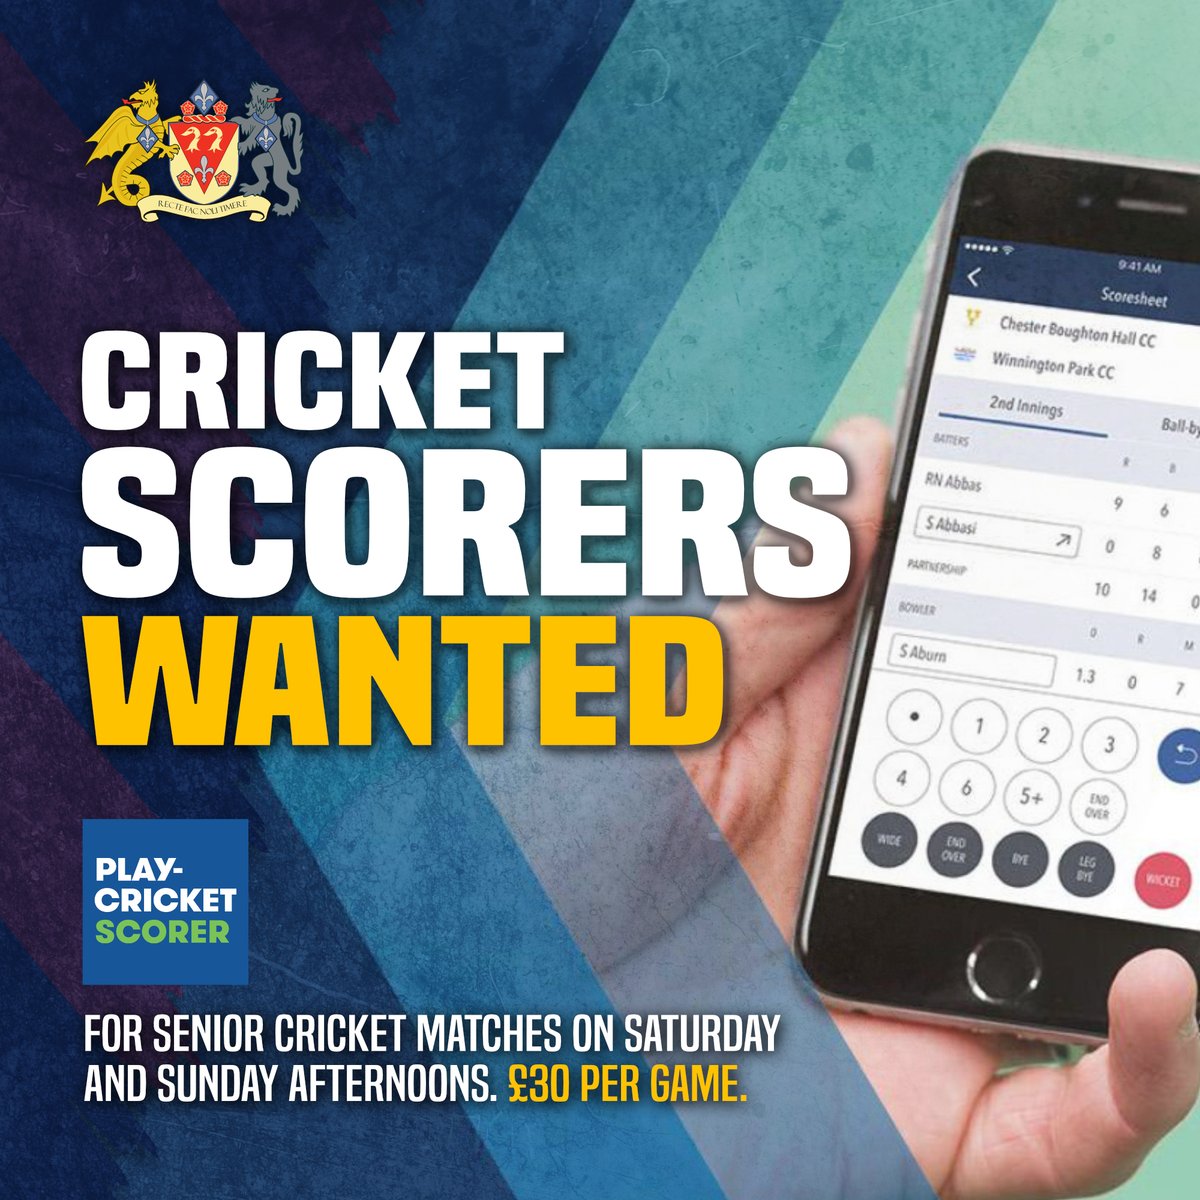 𝐂𝐑𝐈𝐂𝐊𝐄𝐓 𝐒𝐂𝐎𝐑𝐄𝐑𝐒 𝐖𝐀𝐍𝐓𝐄𝐃 Fancy earning £30 a game even if rained off? Scorers wanted for senior cricket games, please text Pete on 07729 016 945 if interested. Read more⬇️ pctb.club/s6Ihp